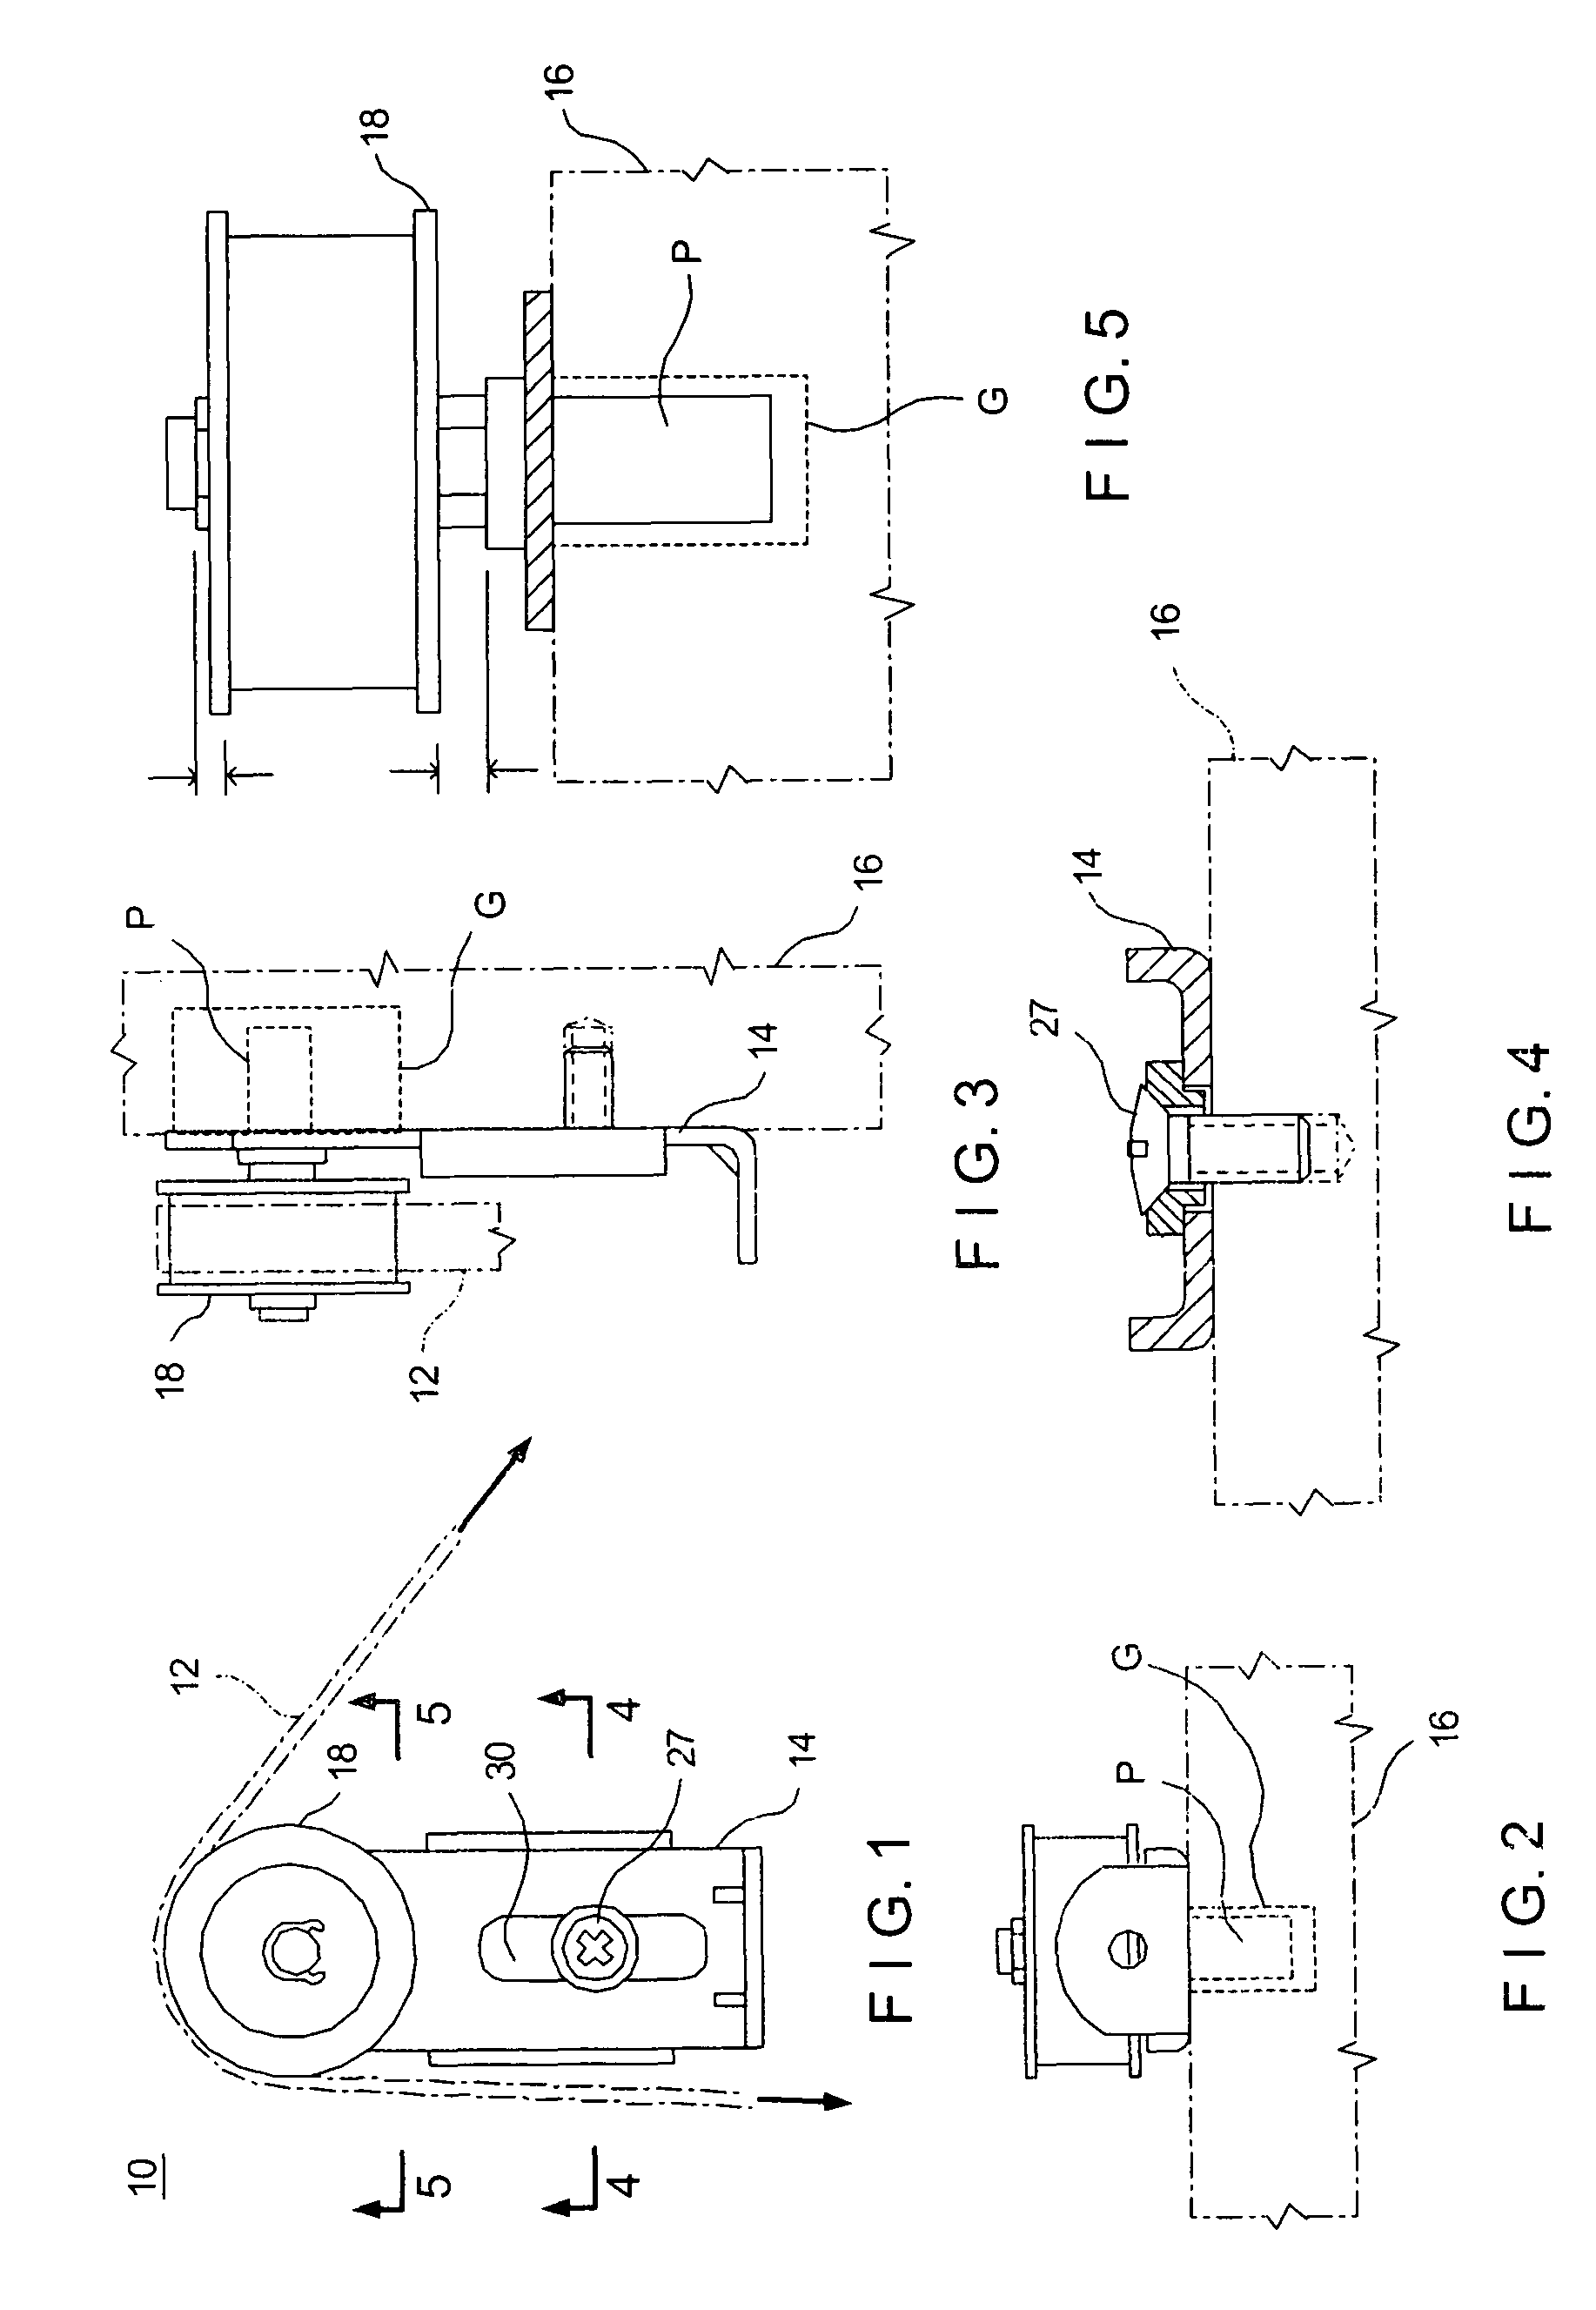 Device for placing a looped belt under tension